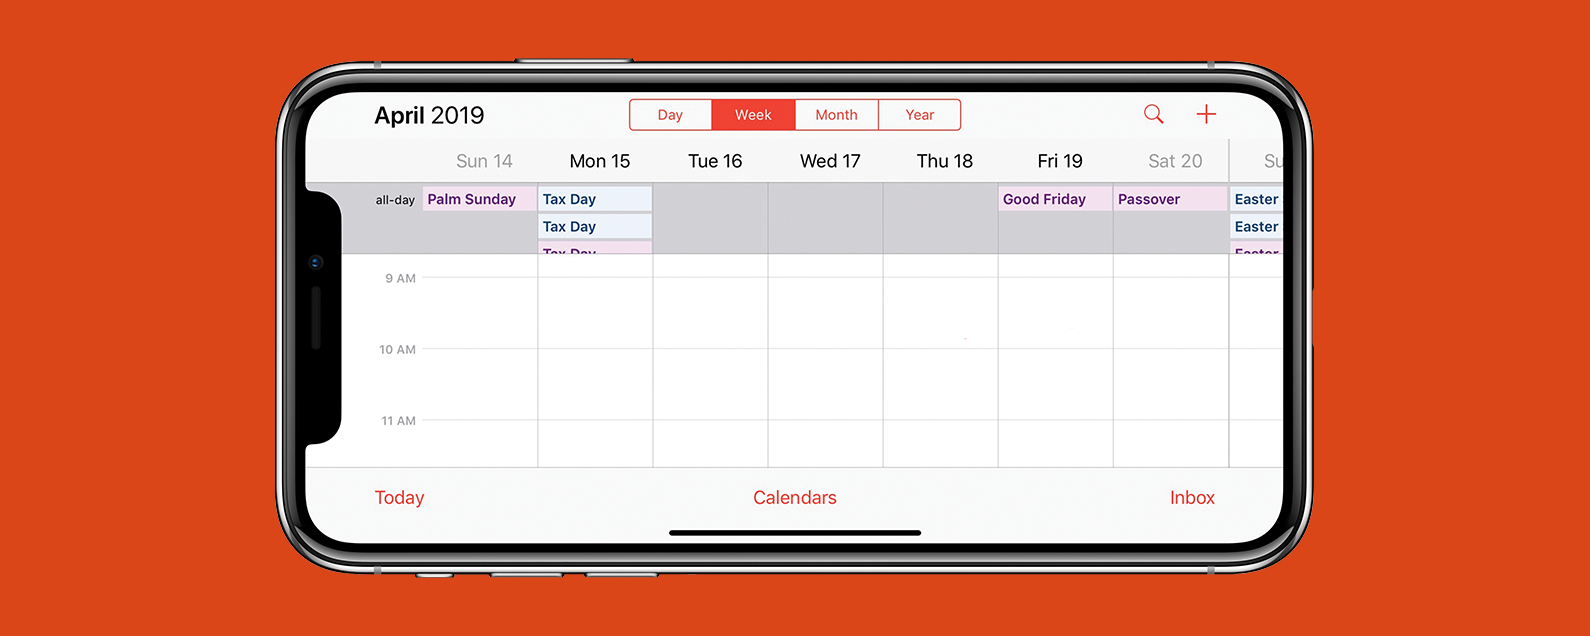 How To See The Week View In The Calendar App On Your Iphone